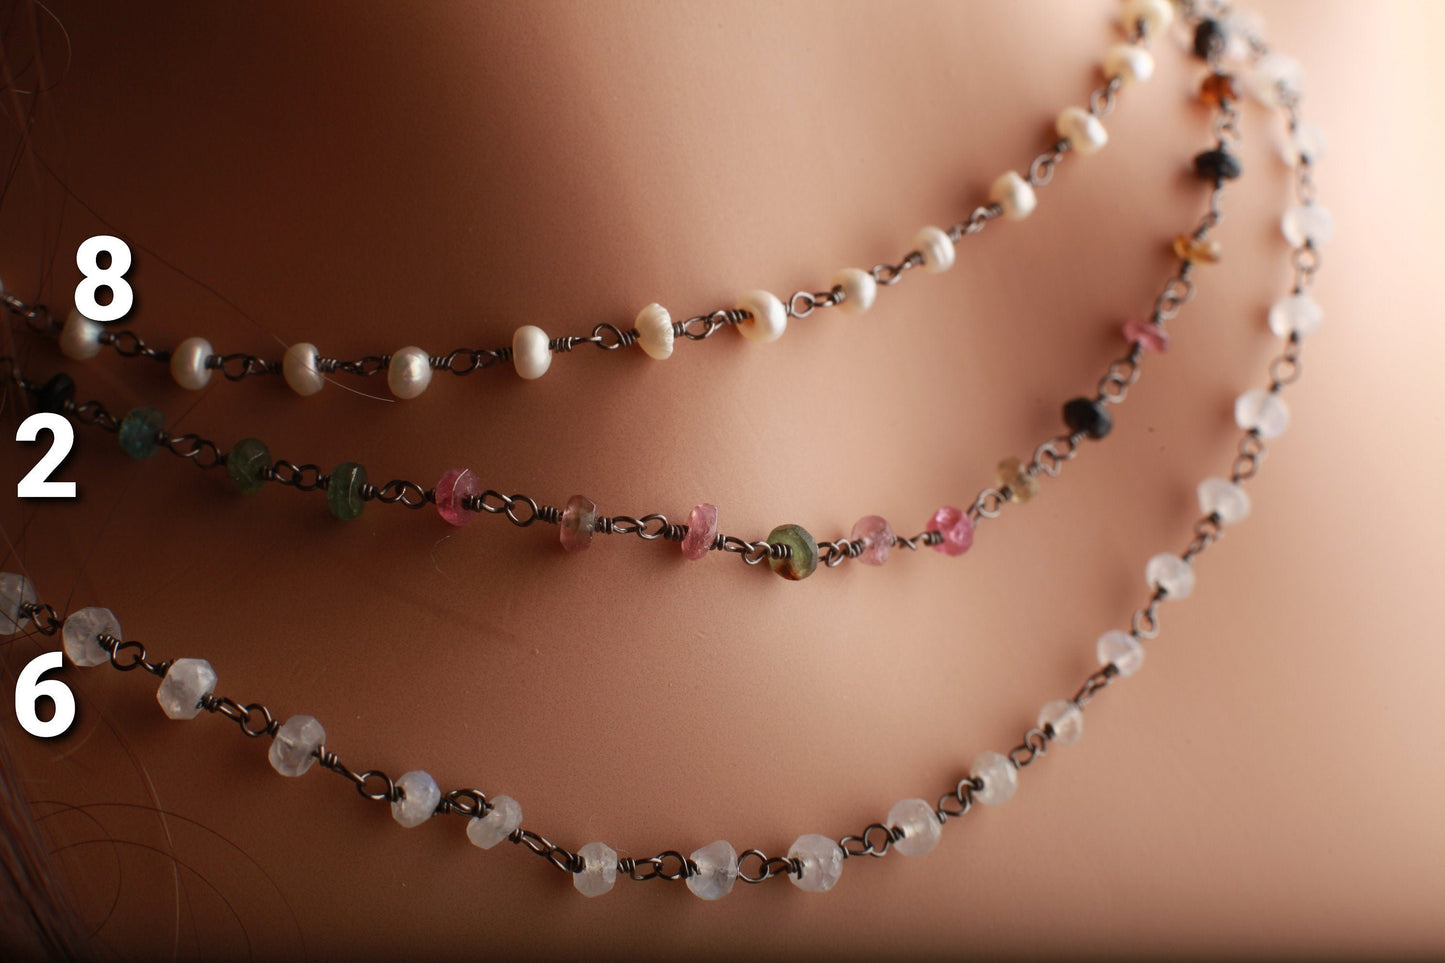 Labradorite,Tourmaline,Peru opalPink Opal,Spinel,Moonstone,Peach Moonstone,Pearl,Rhodonite,Turquoise,Silver Oxidized Finished Chain Necklace